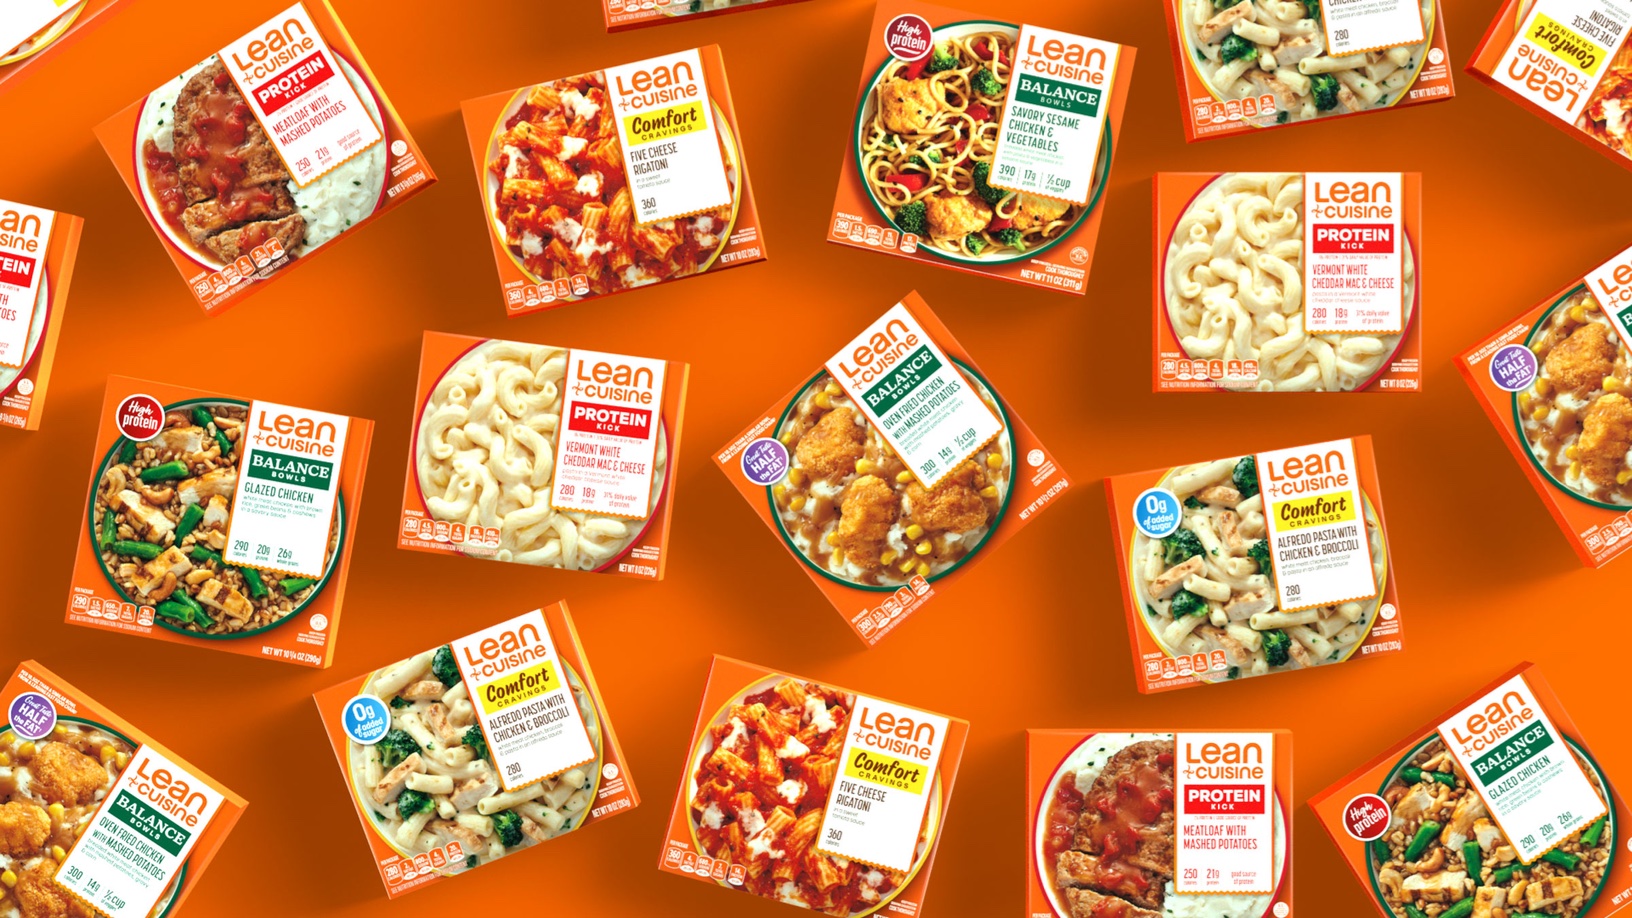 Interact Revitalizes Lean Cuisine With a Branding and Packaging Update